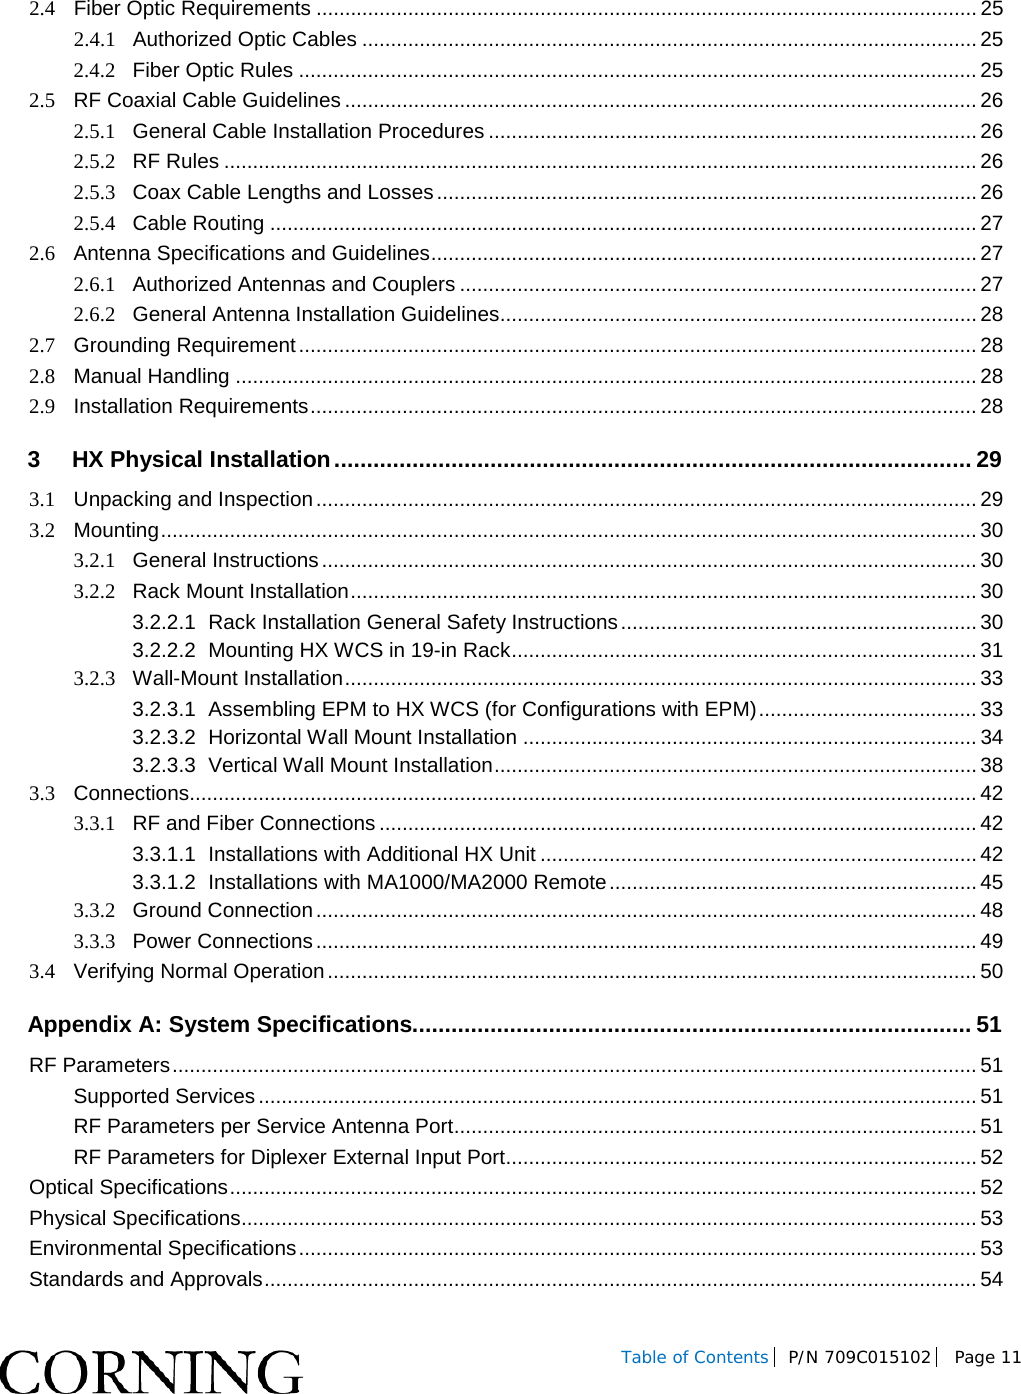   Table of Contents P/N 709C015102  Page 11    2.4 Fiber Optic Requirements ................................................................................................................... 25 2.4.1 Authorized Optic Cables ........................................................................................................... 25 2.4.2 Fiber Optic Rules ...................................................................................................................... 25 2.5 RF Coaxial Cable Guidelines .............................................................................................................. 26 2.5.1 General Cable Installation Procedures ..................................................................................... 26 2.5.2 RF Rules ................................................................................................................................... 26 2.5.3 Coax Cable Lengths and Losses .............................................................................................. 26 2.5.4 Cable Routing ........................................................................................................................... 27 2.6 Antenna Specifications and Guidelines ............................................................................................... 27 2.6.1 Authorized Antennas and Couplers .......................................................................................... 27 2.6.2 General Antenna Installation Guidelines ................................................................................... 28 2.7 Grounding Requirement ...................................................................................................................... 28 2.8 Manual Handling ................................................................................................................................. 28 2.9 Installation Requirements .................................................................................................................... 28 3 HX Physical Installation .................................................................................................. 29 3.1 Unpacking and Inspection ................................................................................................................... 29 3.2 Mounting .............................................................................................................................................. 30 3.2.1 General Instructions .................................................................................................................. 30 3.2.2 Rack Mount Installation ............................................................................................................. 30 3.2.2.1 Rack Installation General Safety Instructions .............................................................. 30 3.2.2.2 Mounting HX WCS in 19-in Rack ................................................................................. 31 3.2.3 Wall-Mount Installation .............................................................................................................. 33 3.2.3.1 Assembling EPM to HX WCS (for Configurations with EPM) ...................................... 33 3.2.3.2 Horizontal Wall Mount Installation ............................................................................... 34 3.2.3.3 Vertical Wall Mount Installation .................................................................................... 38 3.3 Connections......................................................................................................................................... 42 3.3.1 RF and Fiber Connections ........................................................................................................ 42 3.3.1.1 Installations with Additional HX Unit ............................................................................ 42 3.3.1.2 Installations with MA1000/MA2000 Remote ................................................................ 45 3.3.2 Ground Connection ................................................................................................................... 48 3.3.3 Power Connections ................................................................................................................... 49 3.4 Verifying Normal Operation ................................................................................................................. 50 Appendix A: System Specifications...................................................................................... 51 RF Parameters ............................................................................................................................................ 51 Supported Services ............................................................................................................................. 51 RF Parameters per Service Antenna Port ........................................................................................... 51 RF Parameters for Diplexer External Input Port .................................................................................. 52 Optical Specifications .................................................................................................................................. 52 Physical Specifications................................................................................................................................ 53 Environmental Specifications ...................................................................................................................... 53 Standards and Approvals ............................................................................................................................ 54 